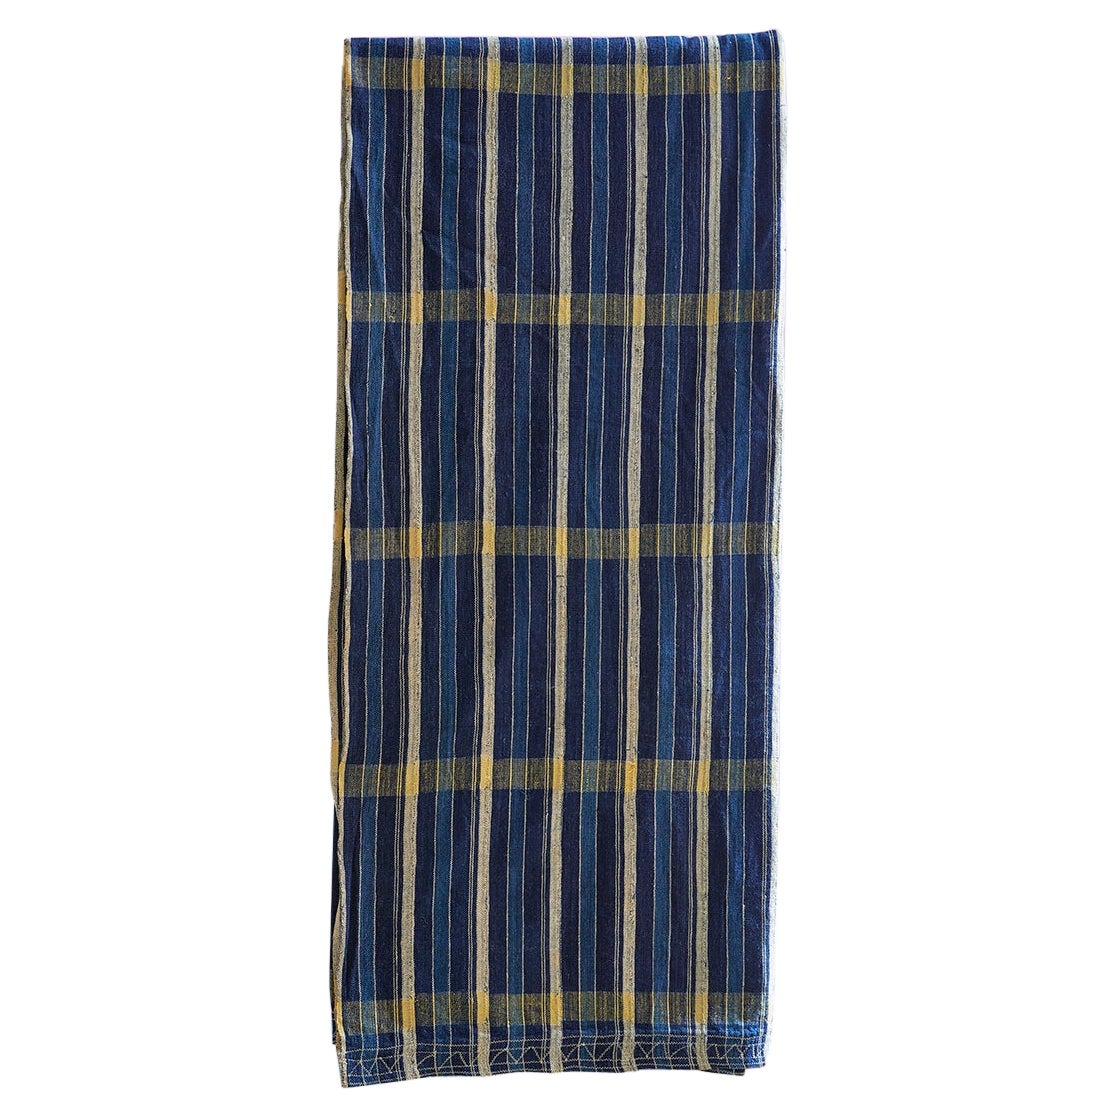 Vintage Men's Cloth in Blue and Yellow Stripes, Ivory Coast, 20th Century For Sale